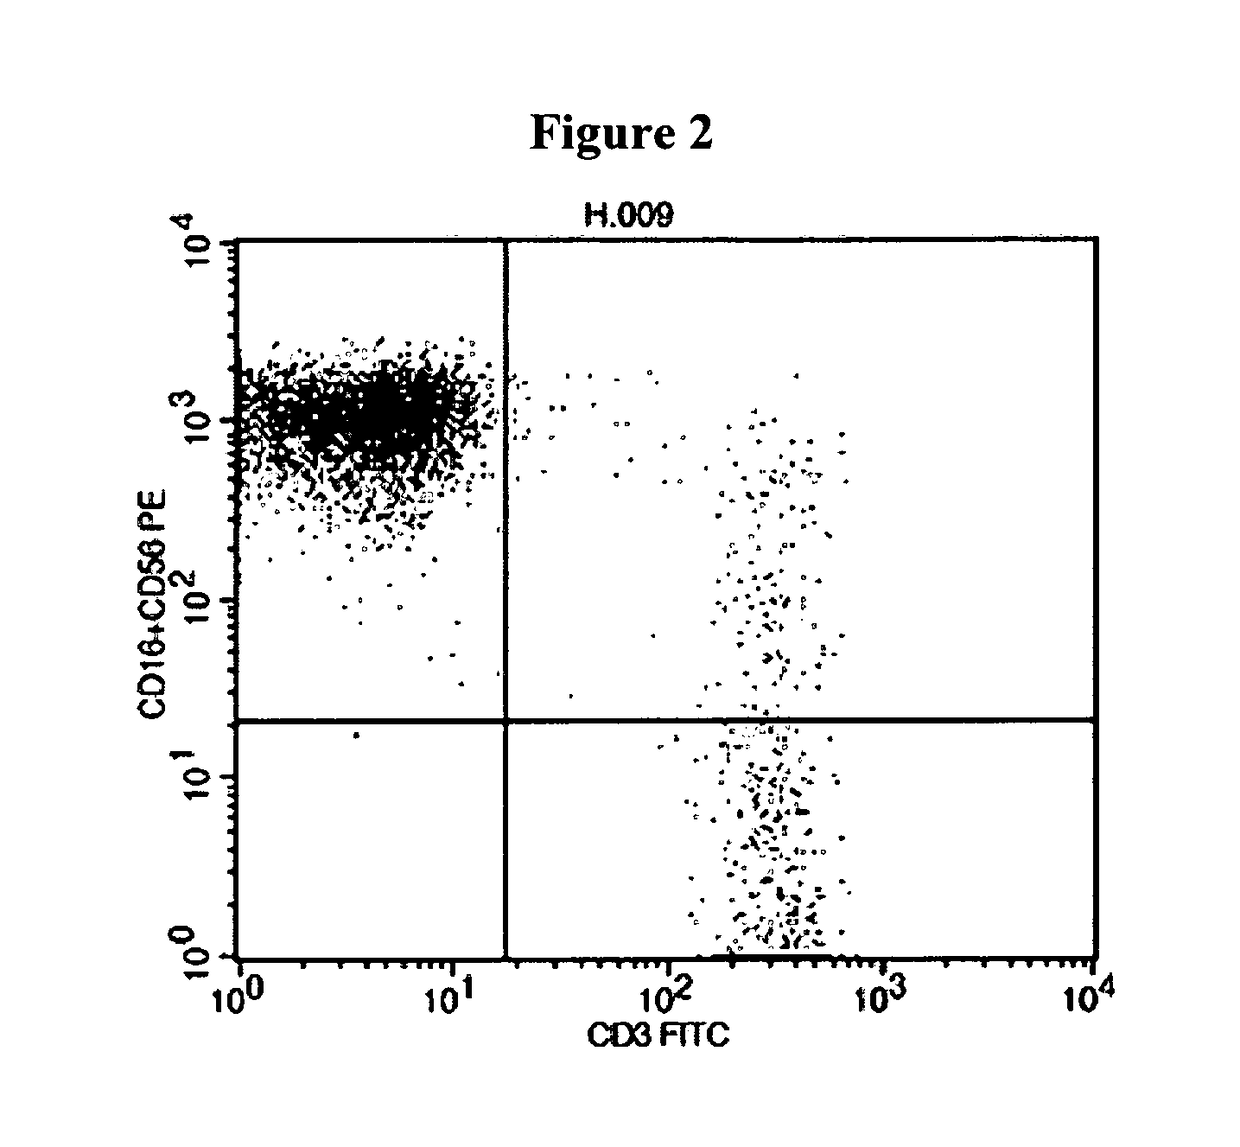 Method of culturing nk cells and kits containing medium addtions therefore